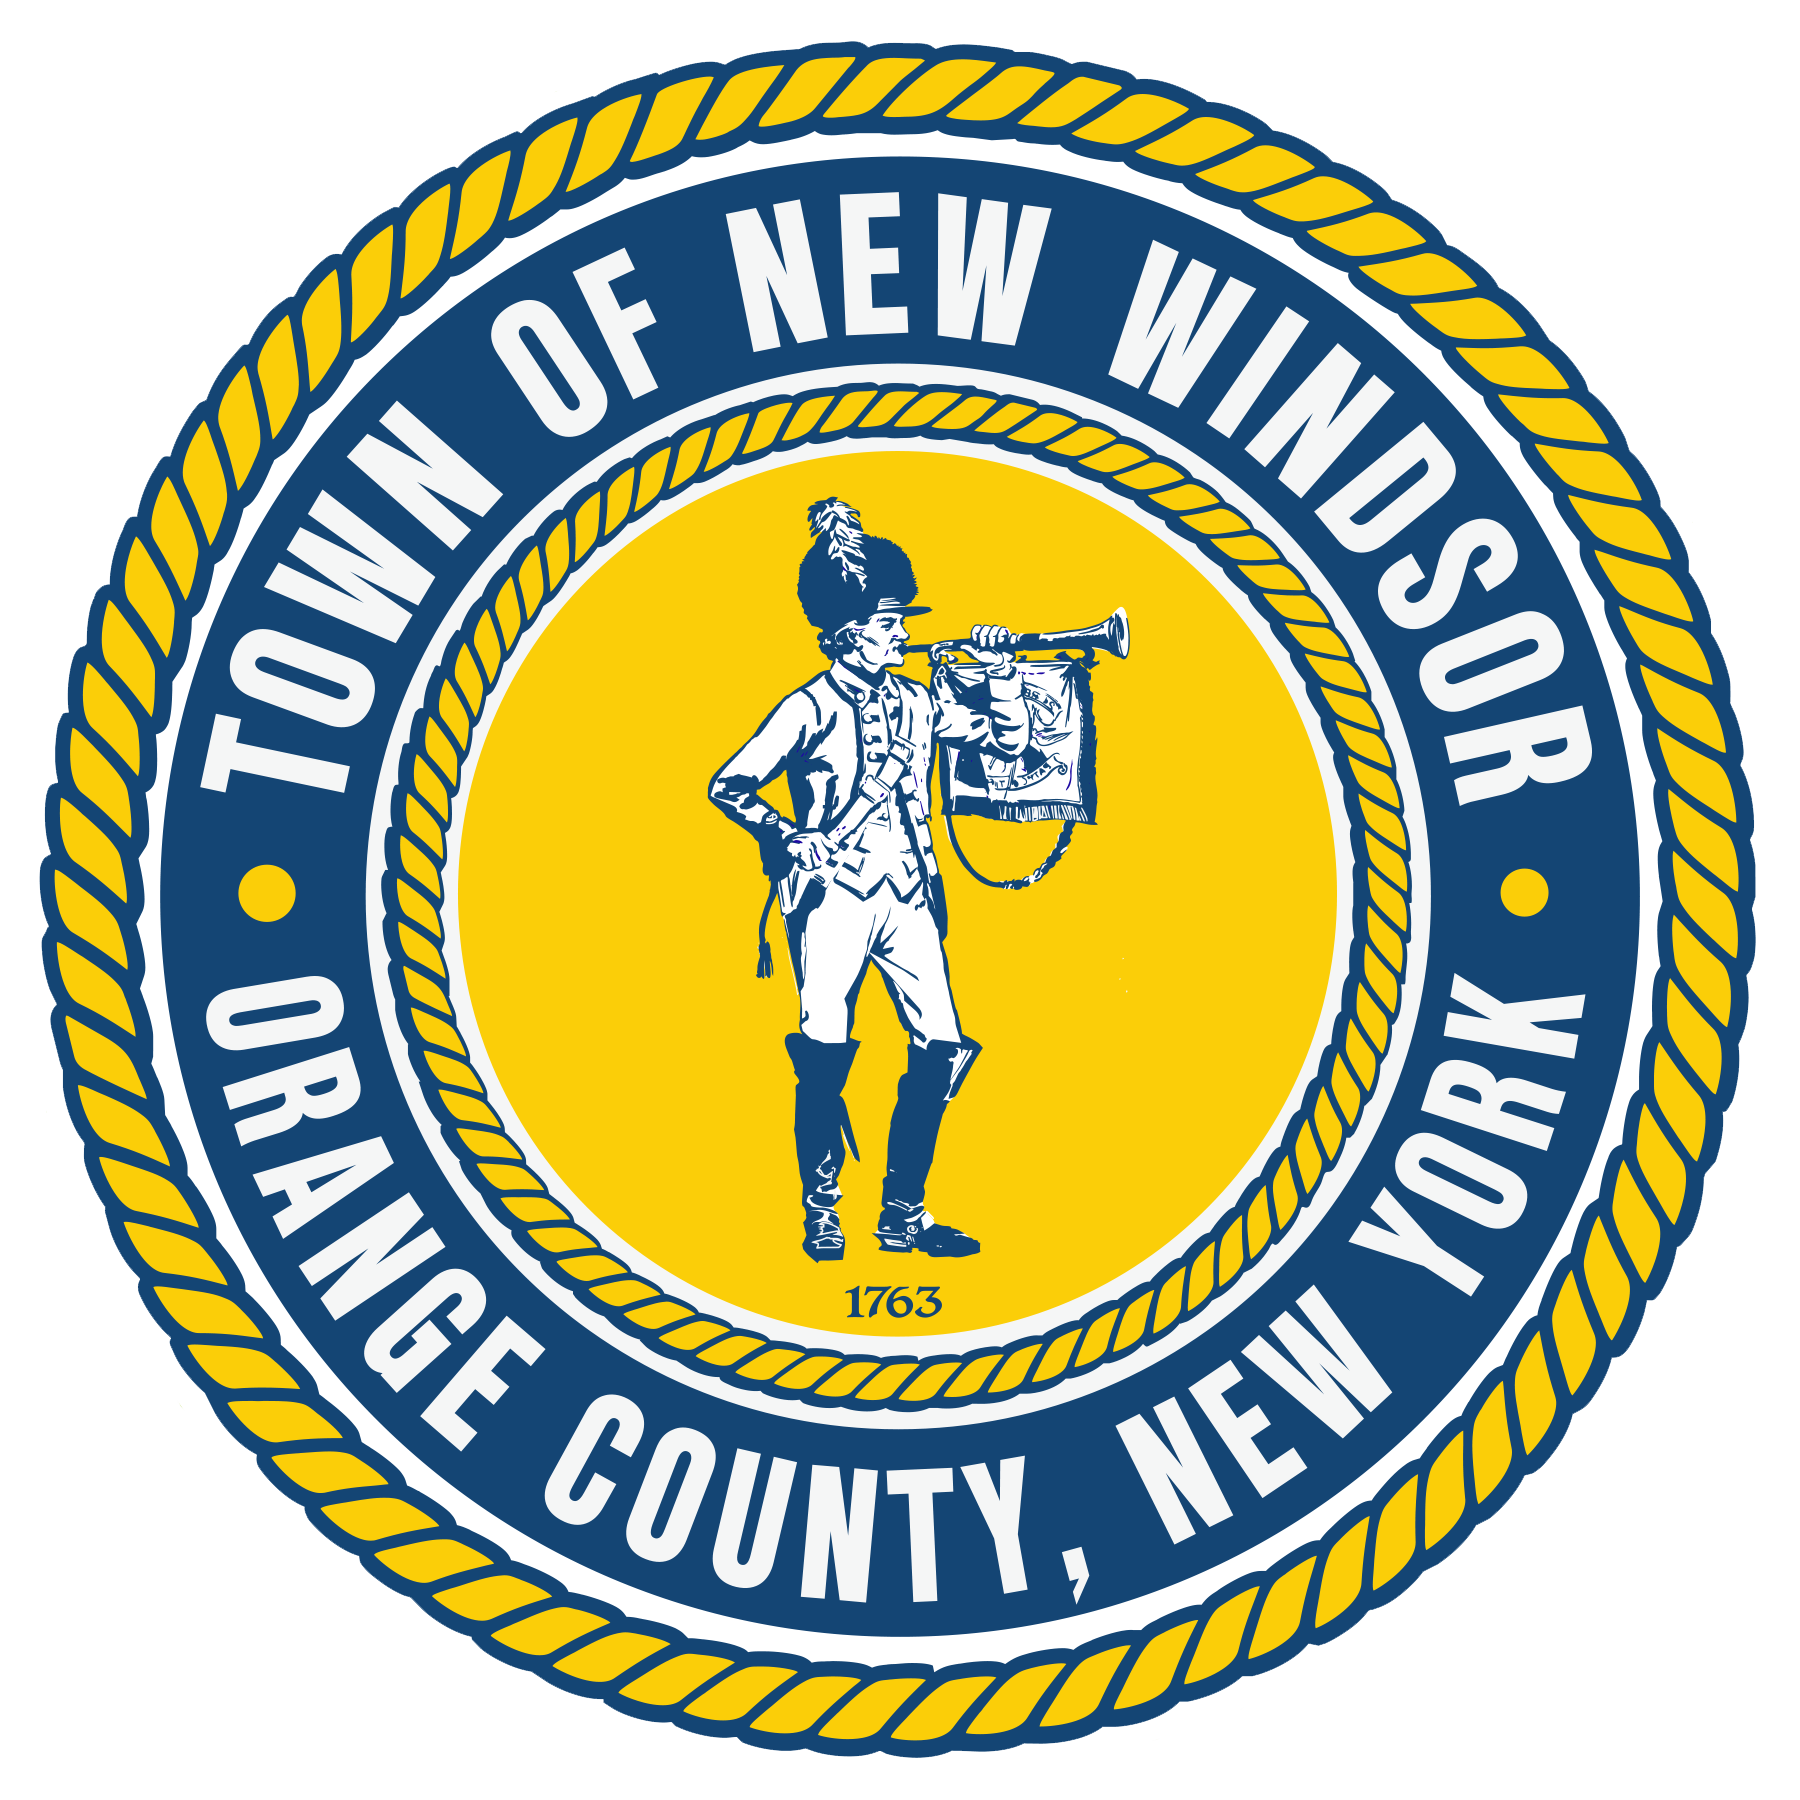 Town of New Windsor